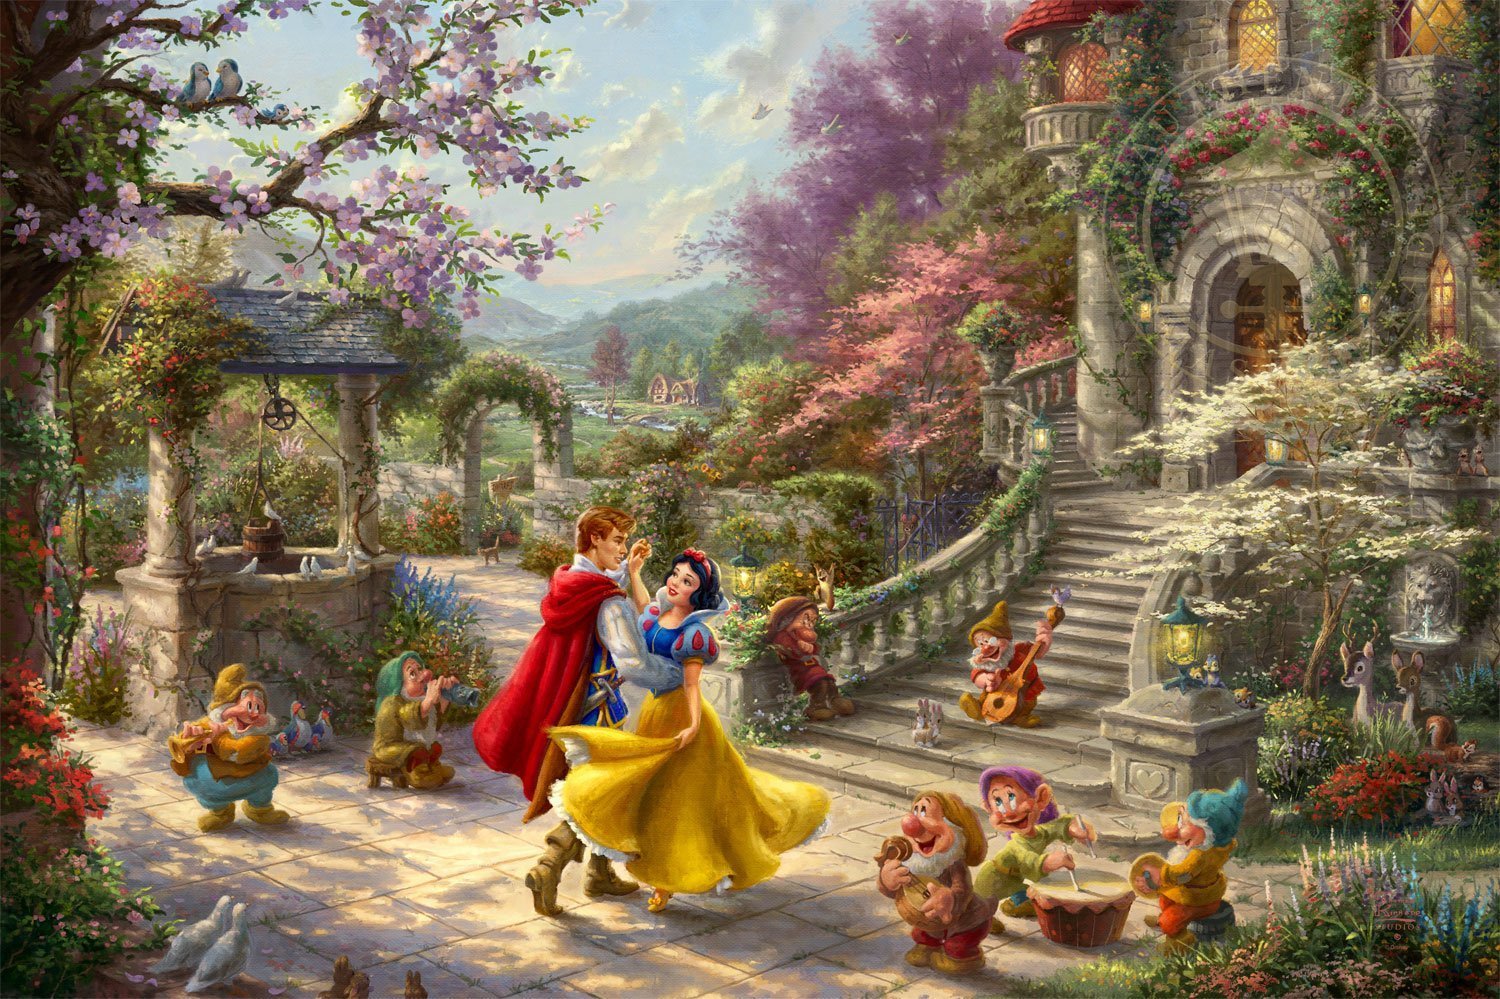 Snow White and the Prince dancing in the courtyard, accompanied by the Seven Dwarfs - Closeup